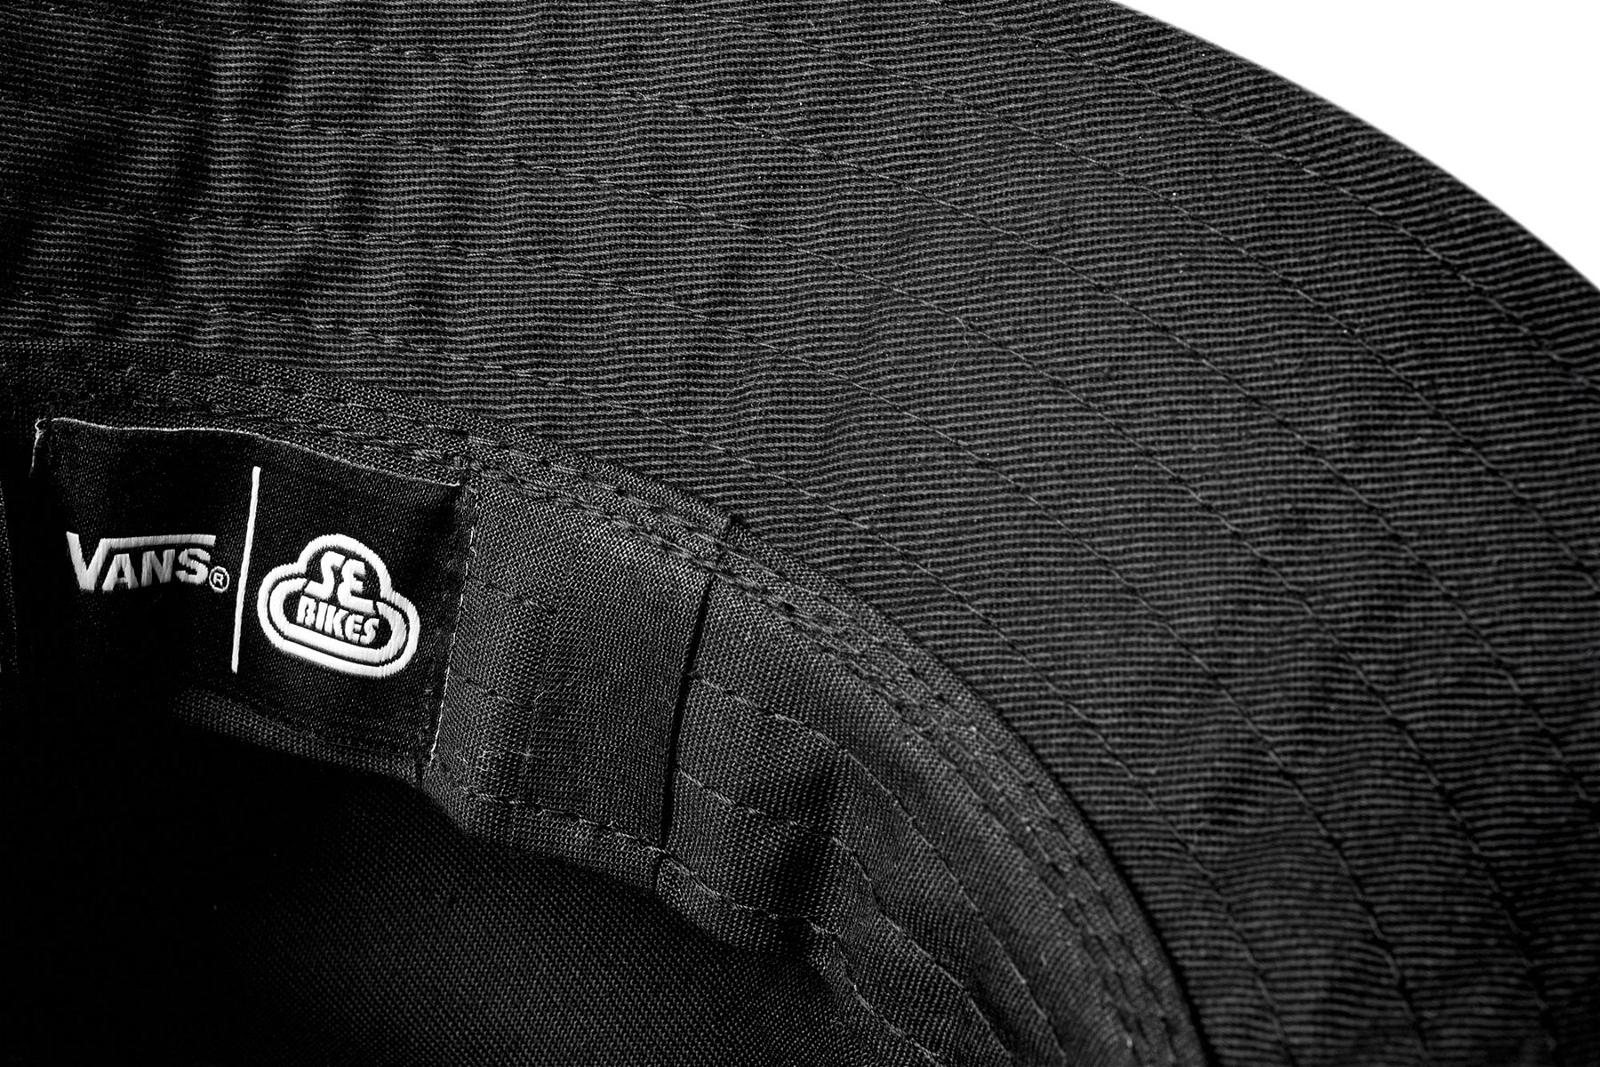 Vans Links With SE Bikes for Second Apparel & Footwear Collaboration